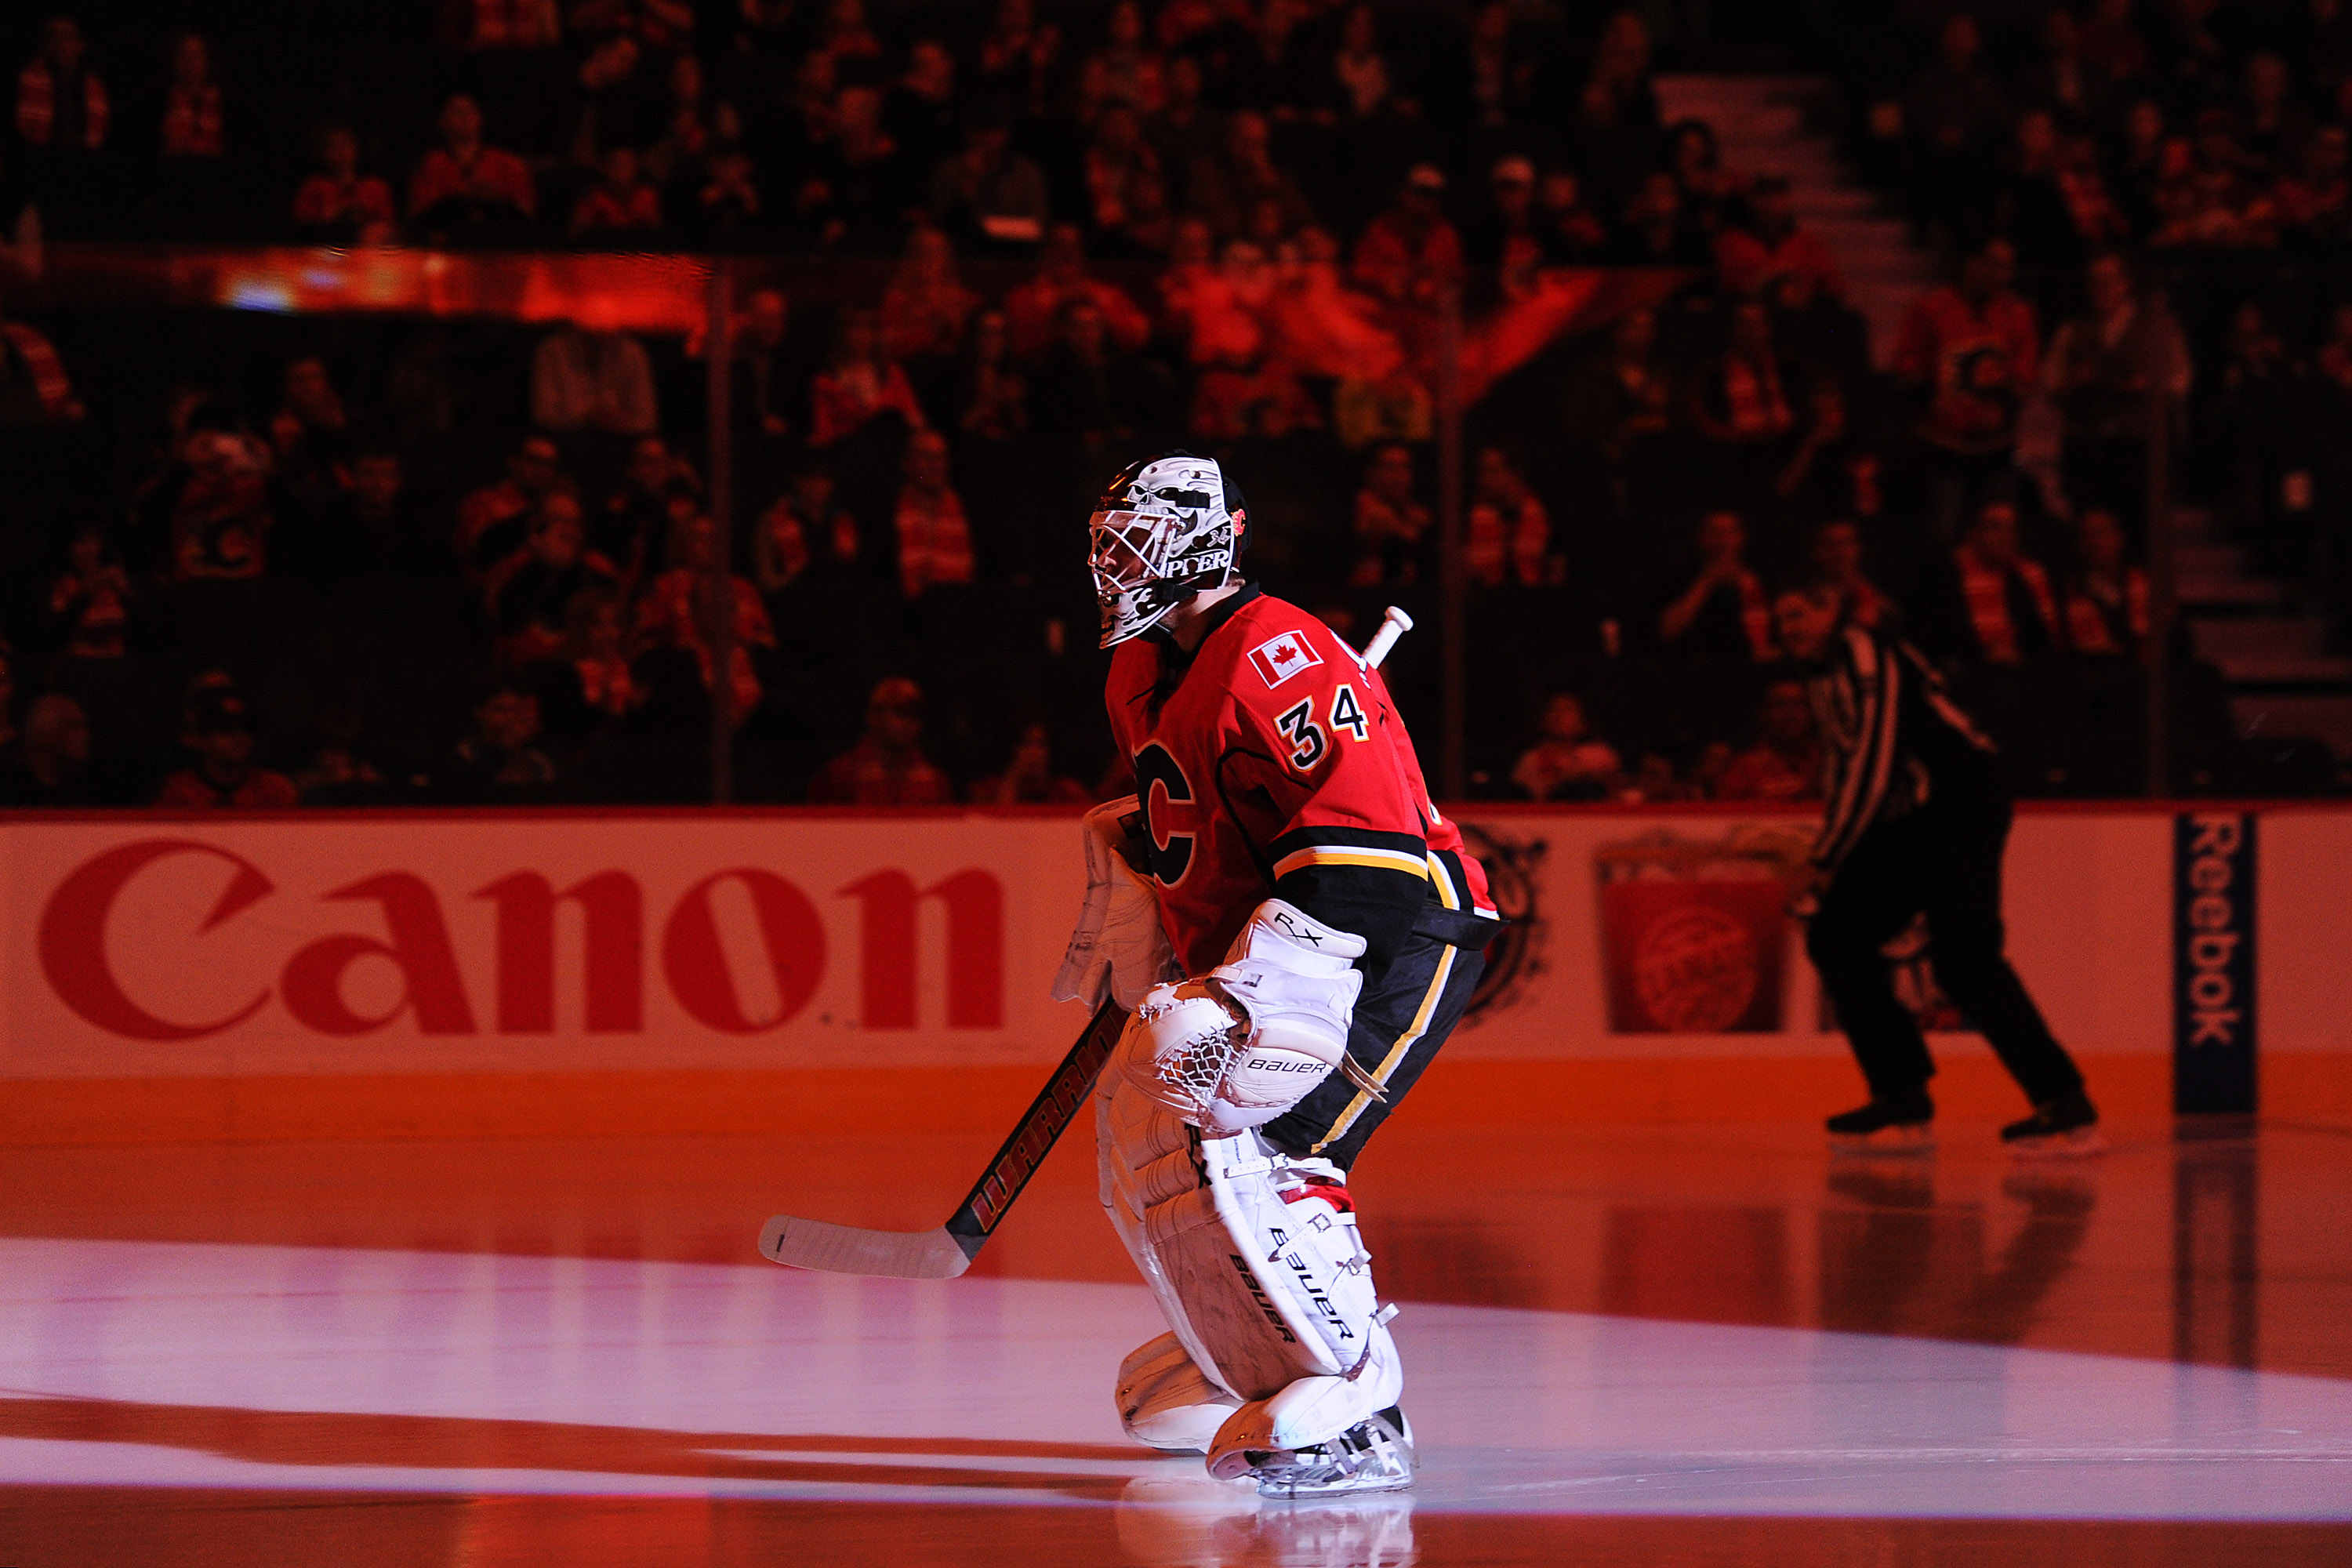 Miikka Kiprusoff will have his jersey up in the rafters on March 2